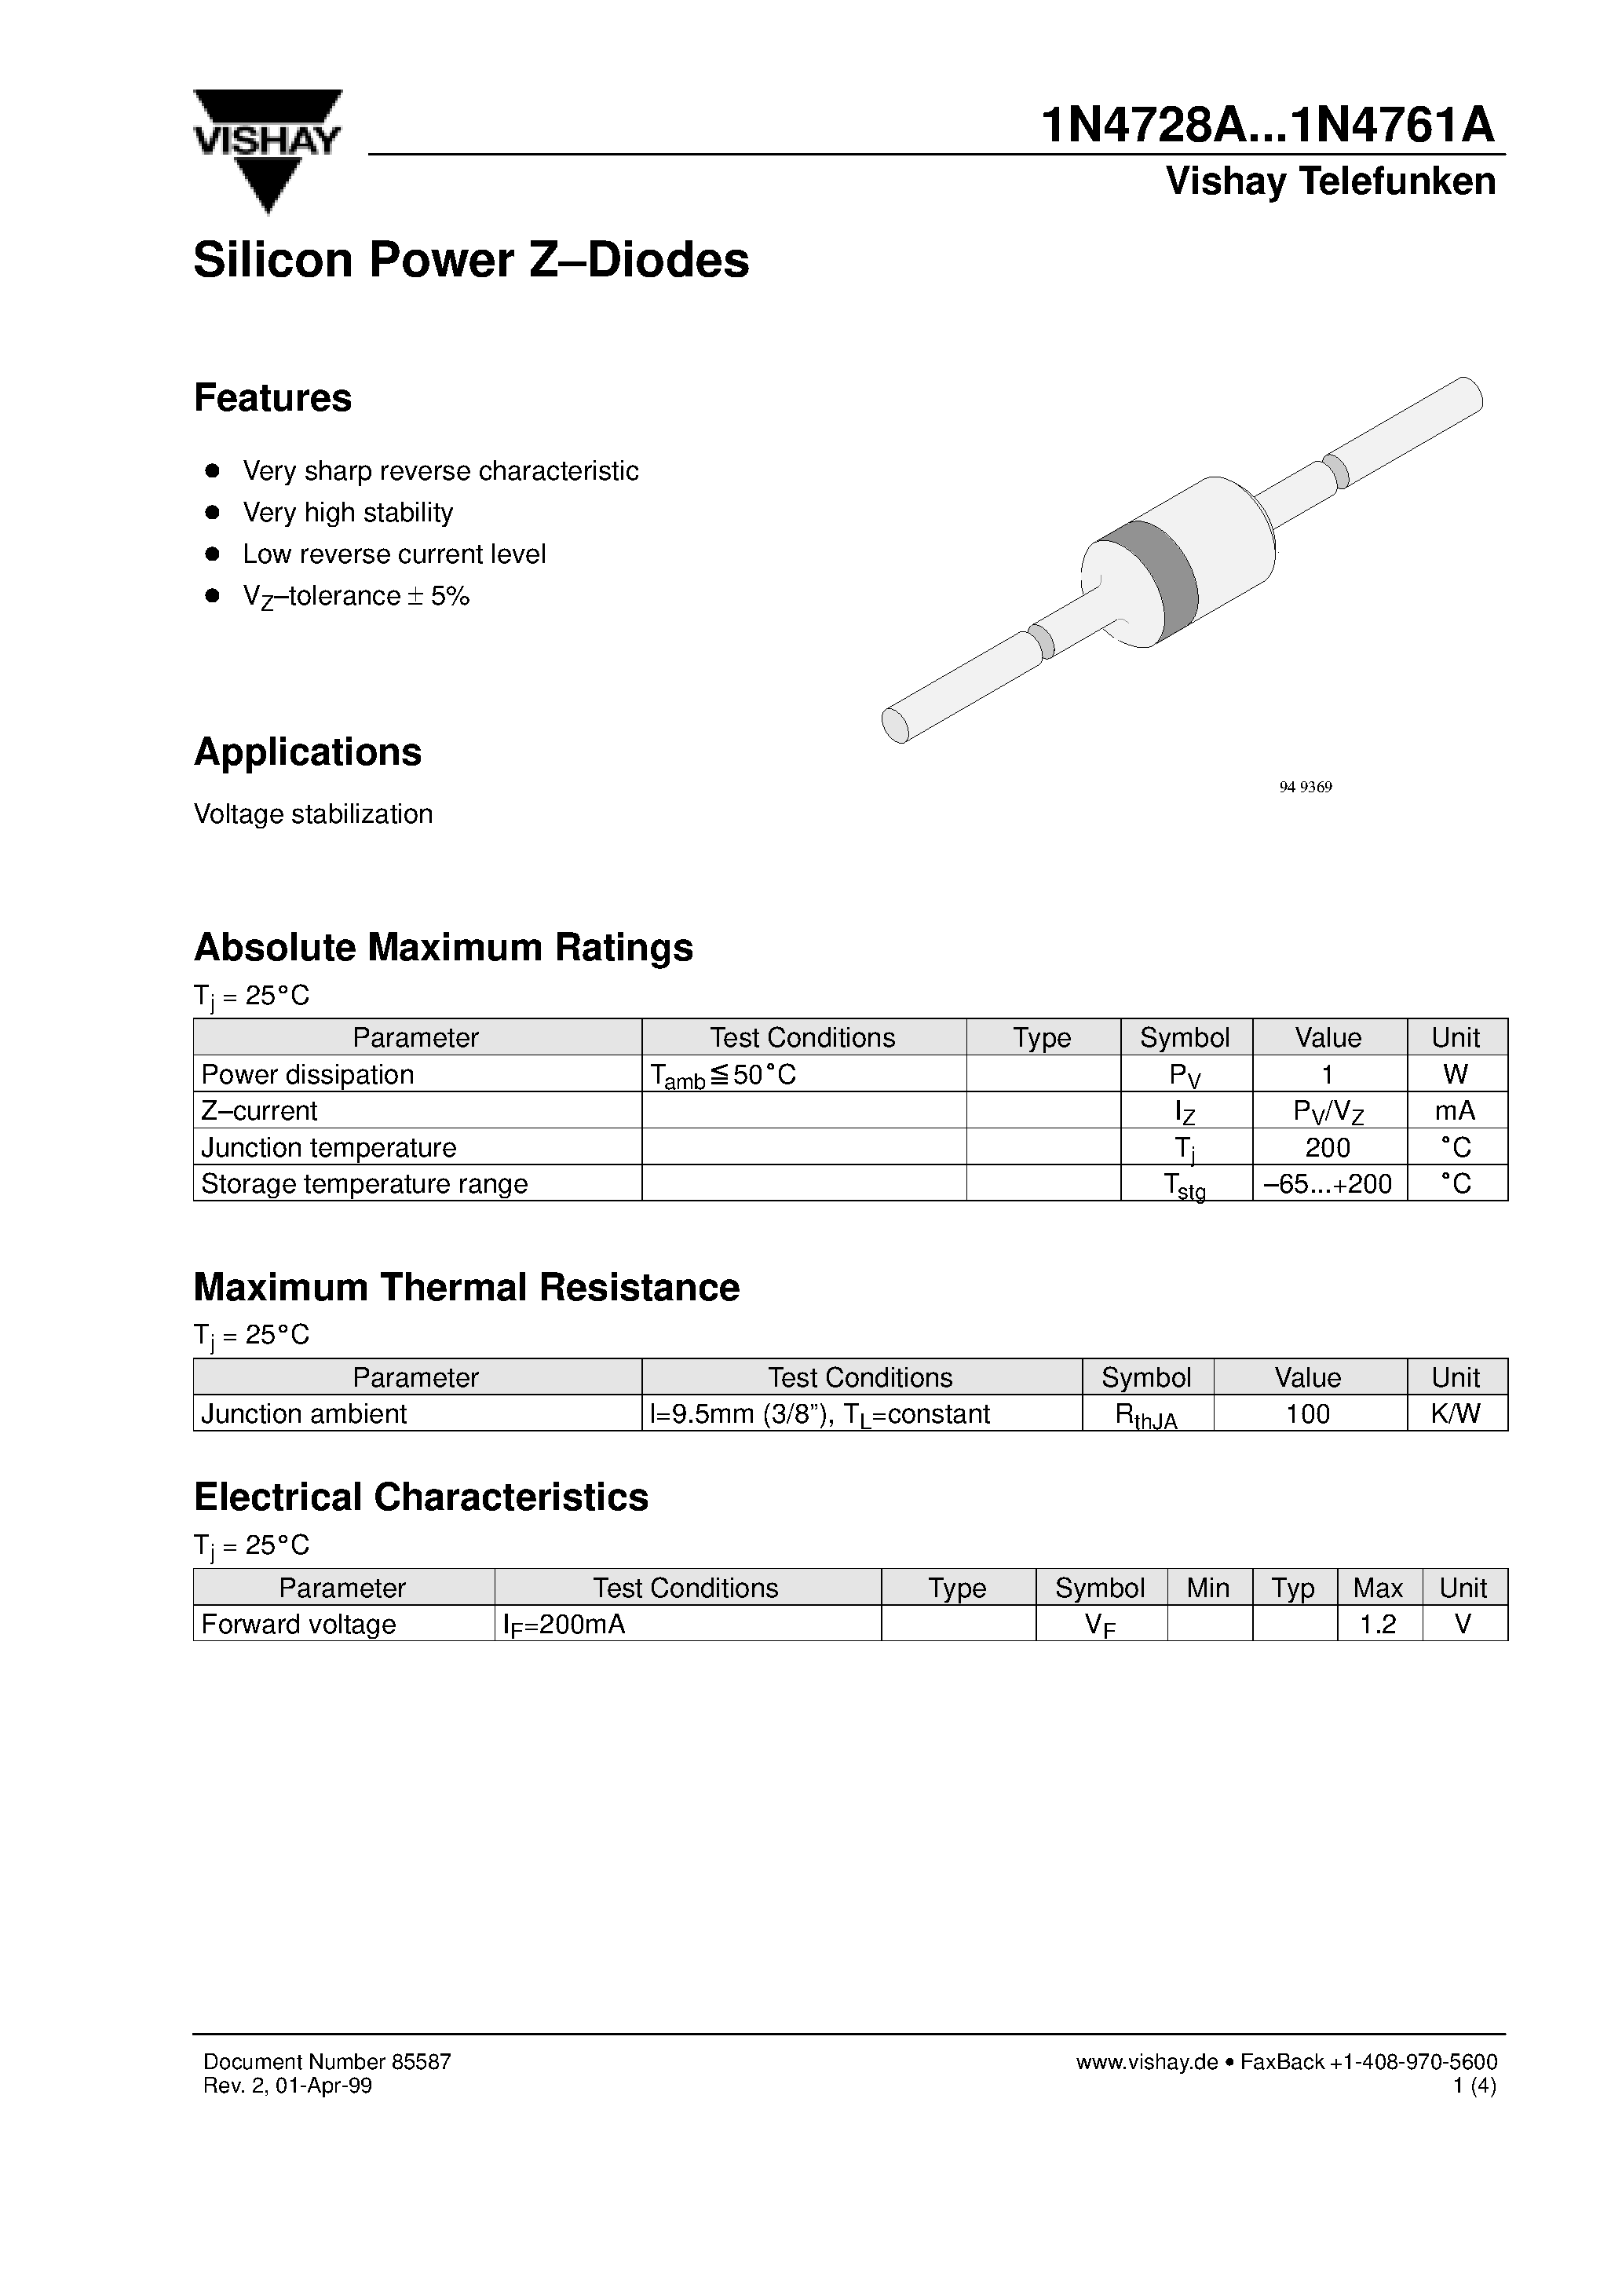 Datasheet 1N4749A - Silicon Power Z-Diodes page 1